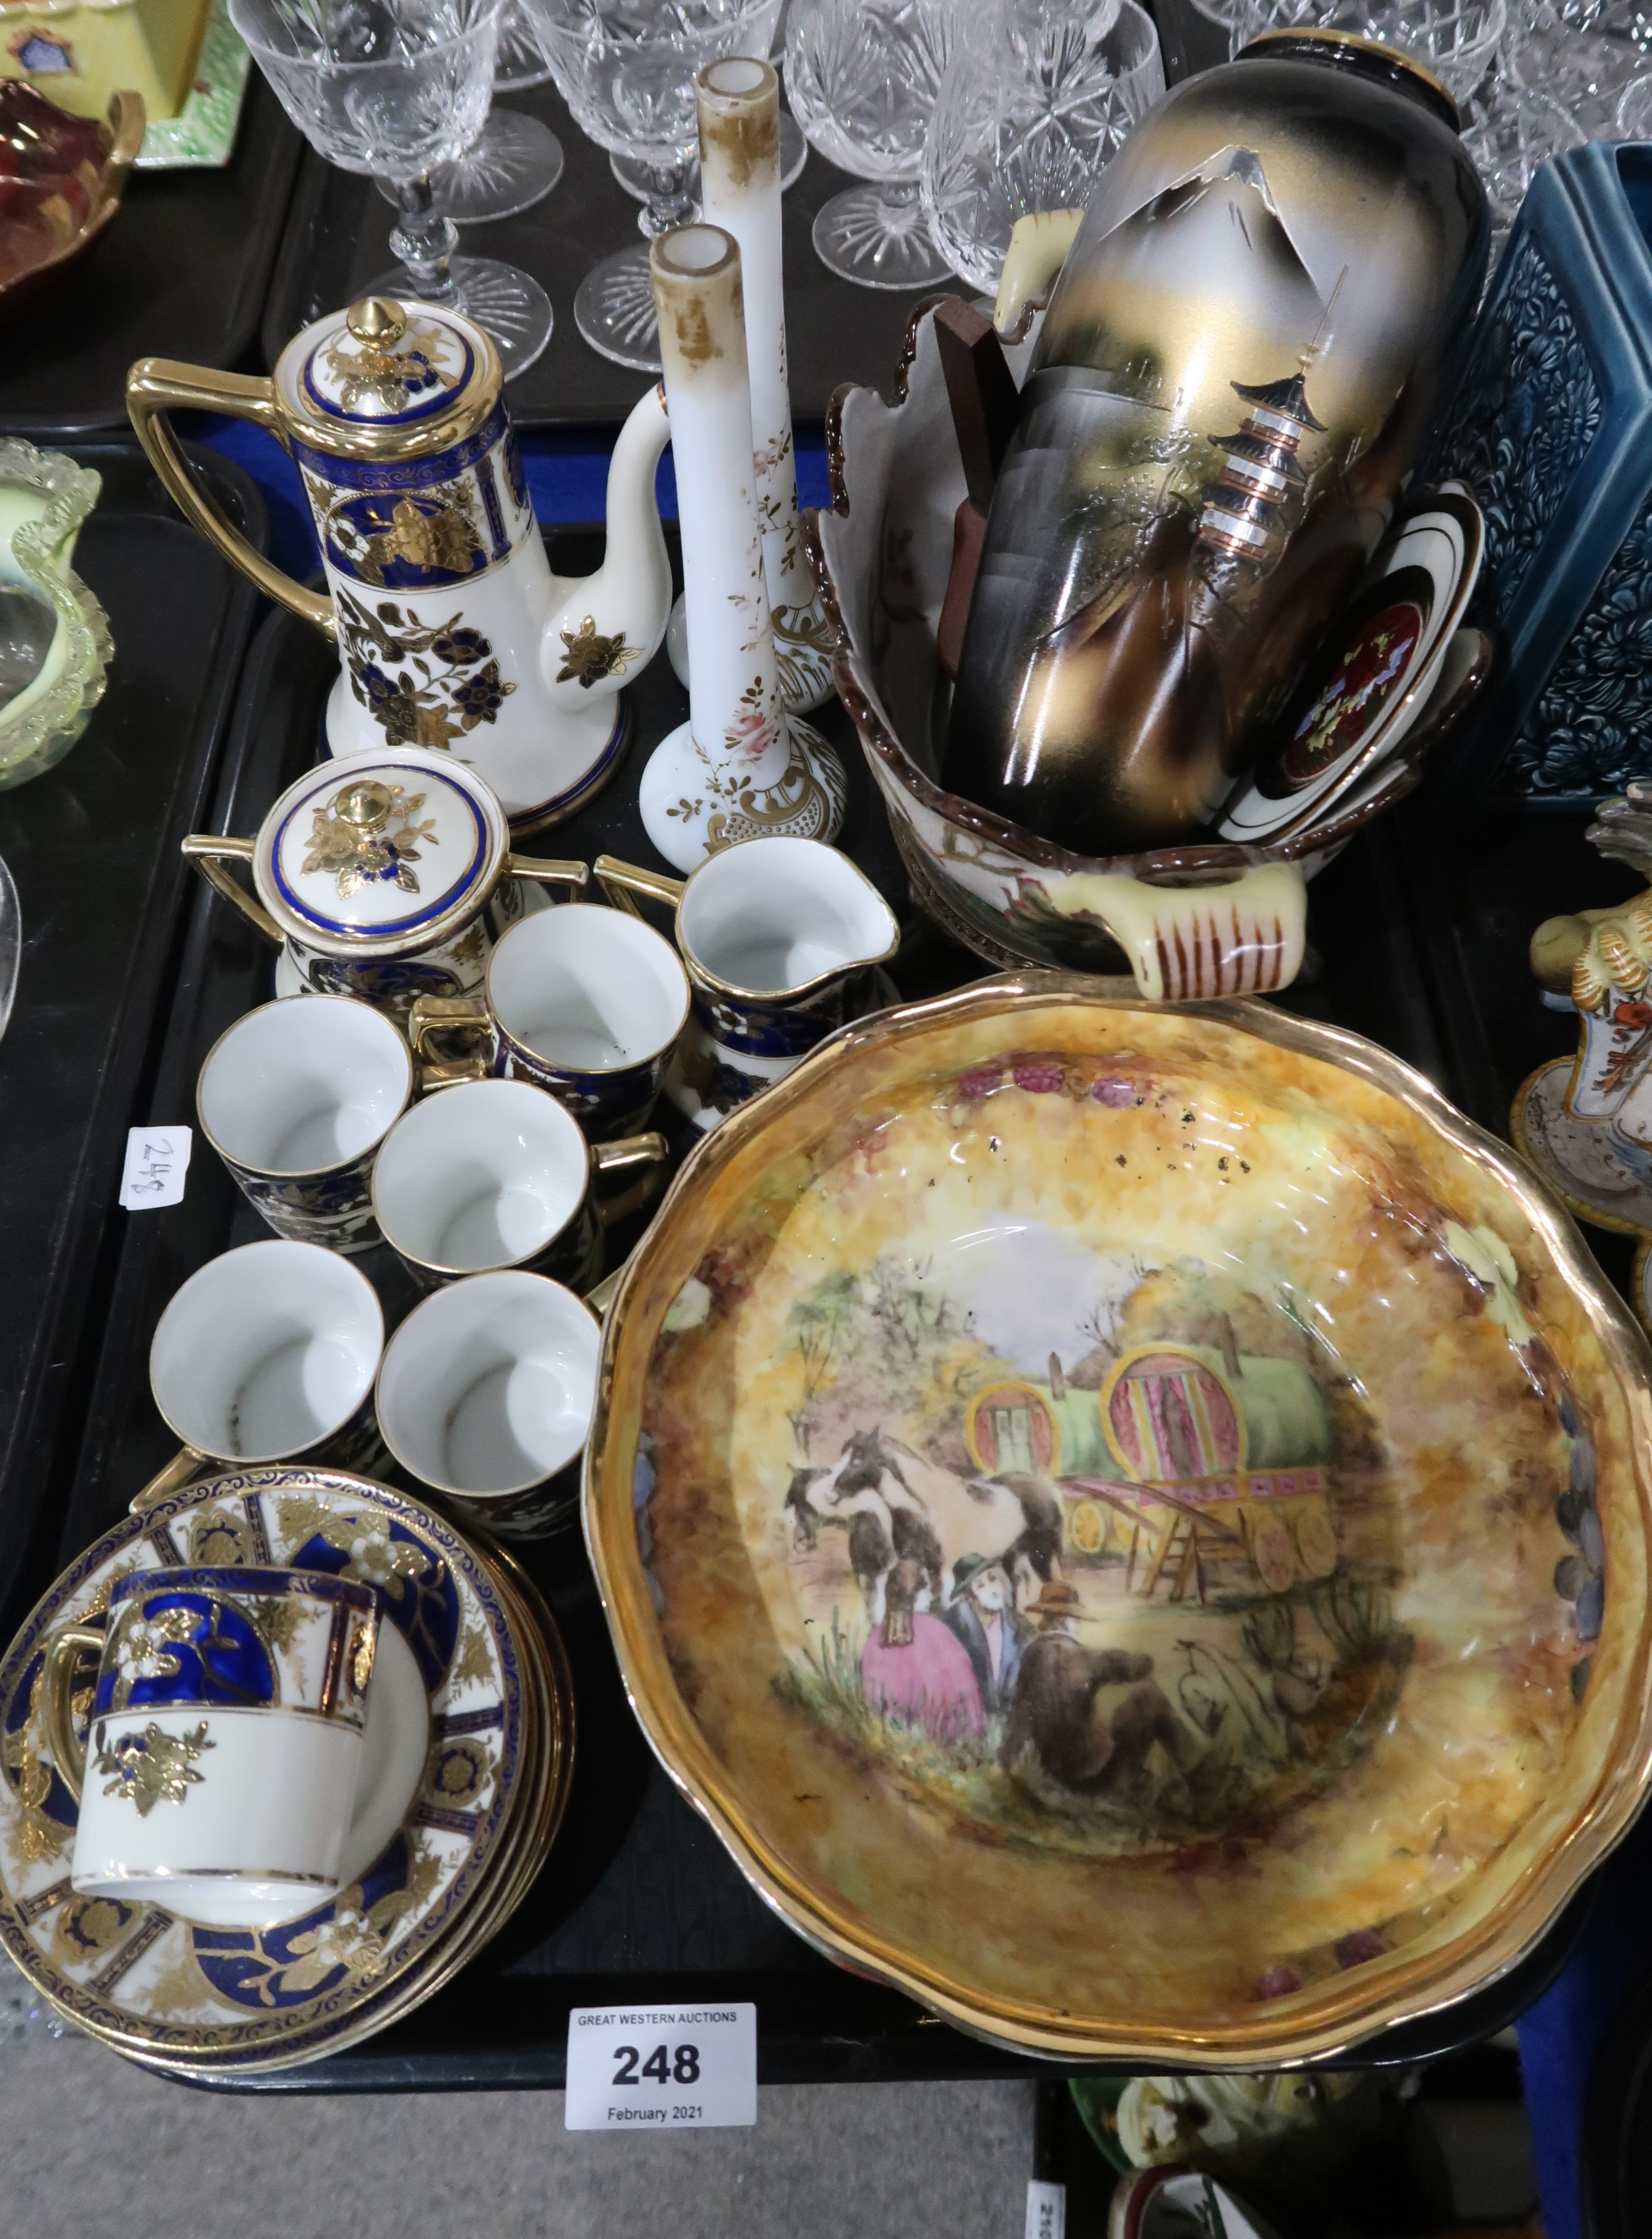 A Baroness China bowl painted with fruit and a scene of travellers, a Noritake coffee set with